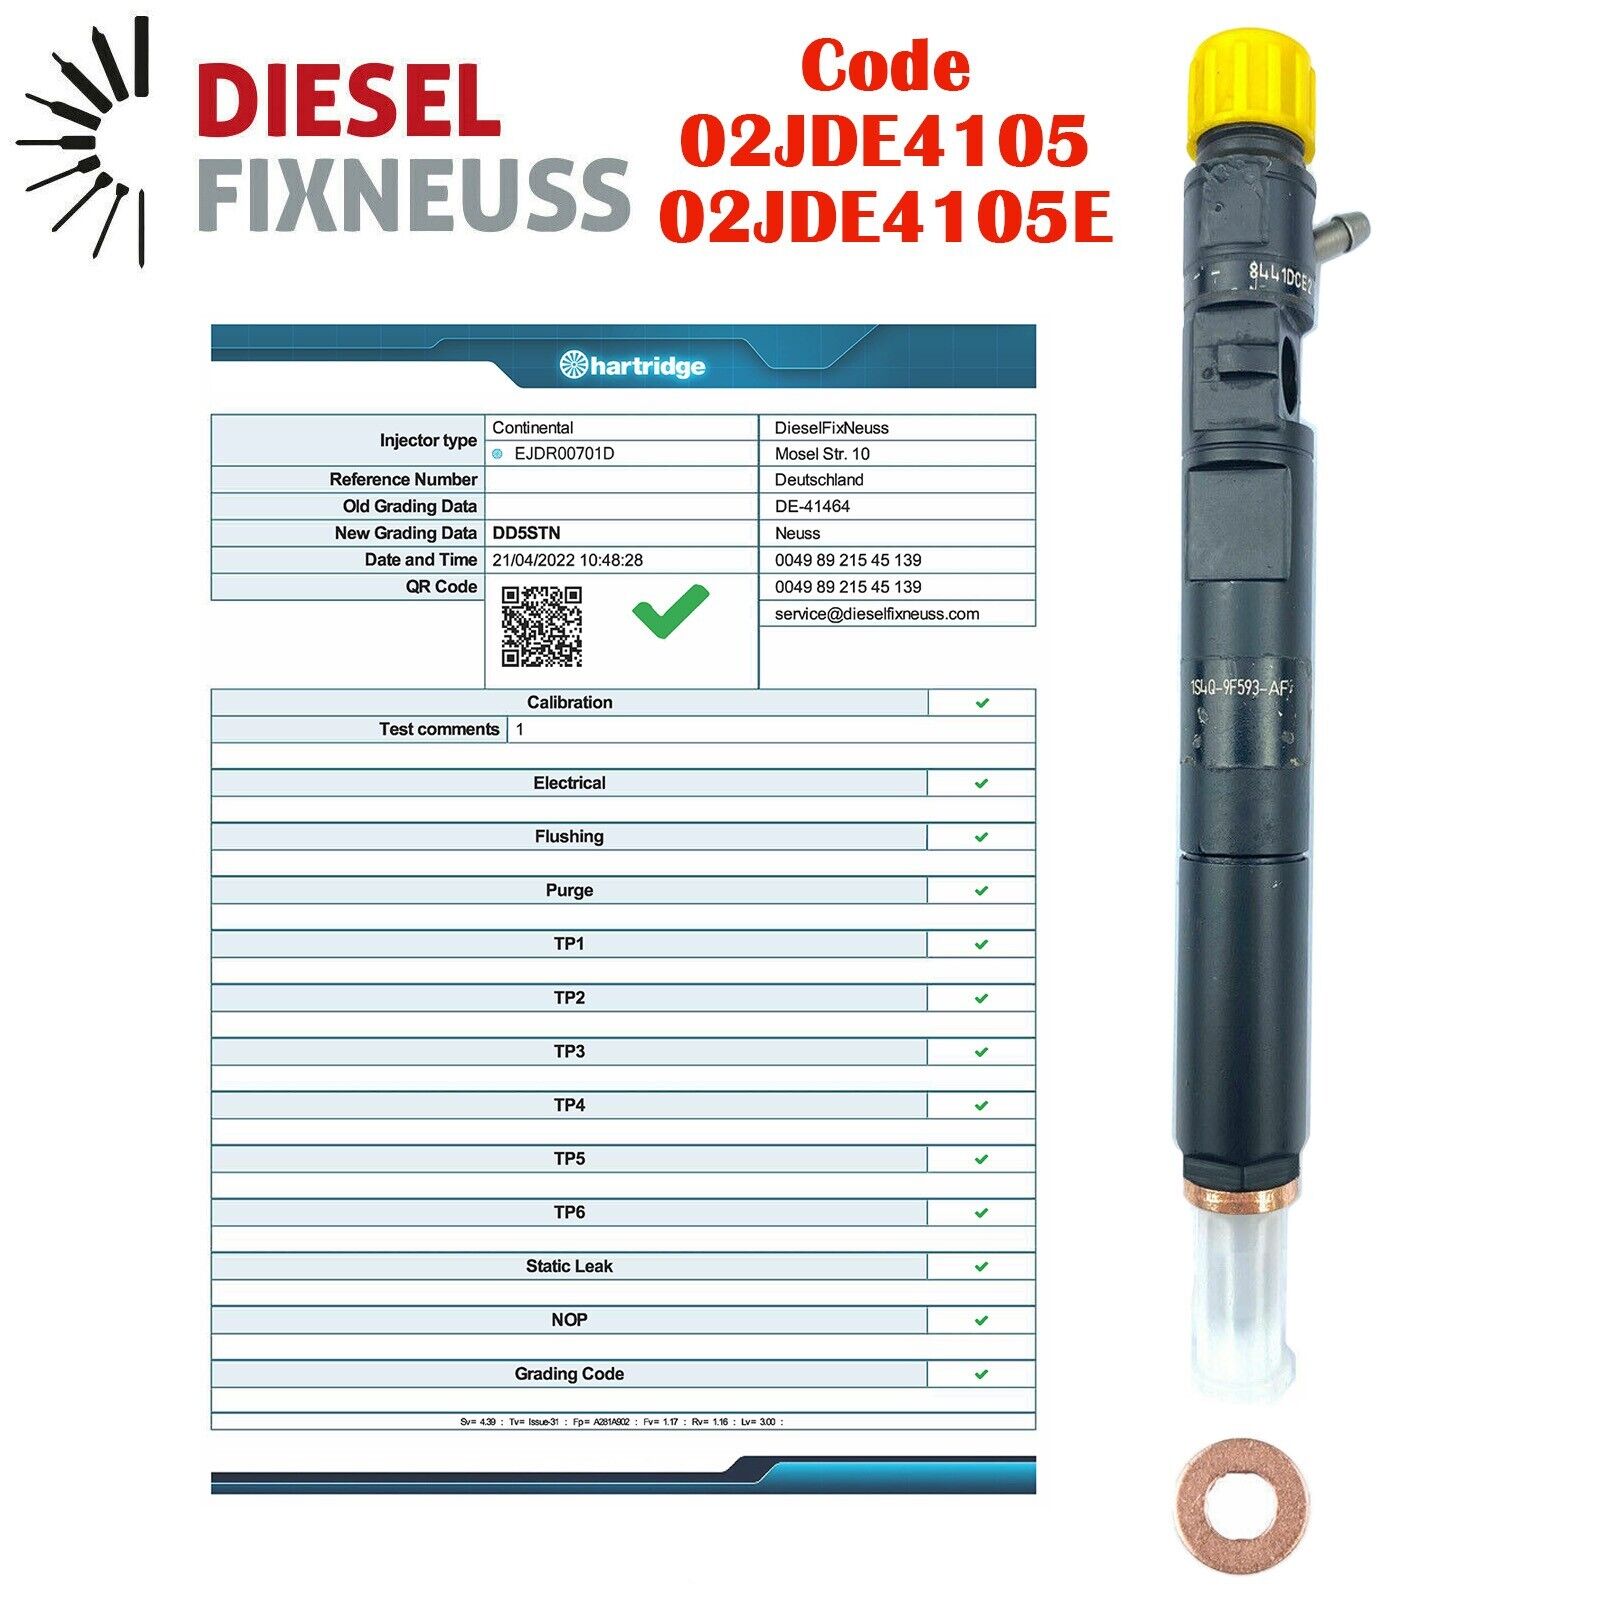 FORD MONDEO 2.2 TDCI DIESEL INJECTOR EJDR00701D